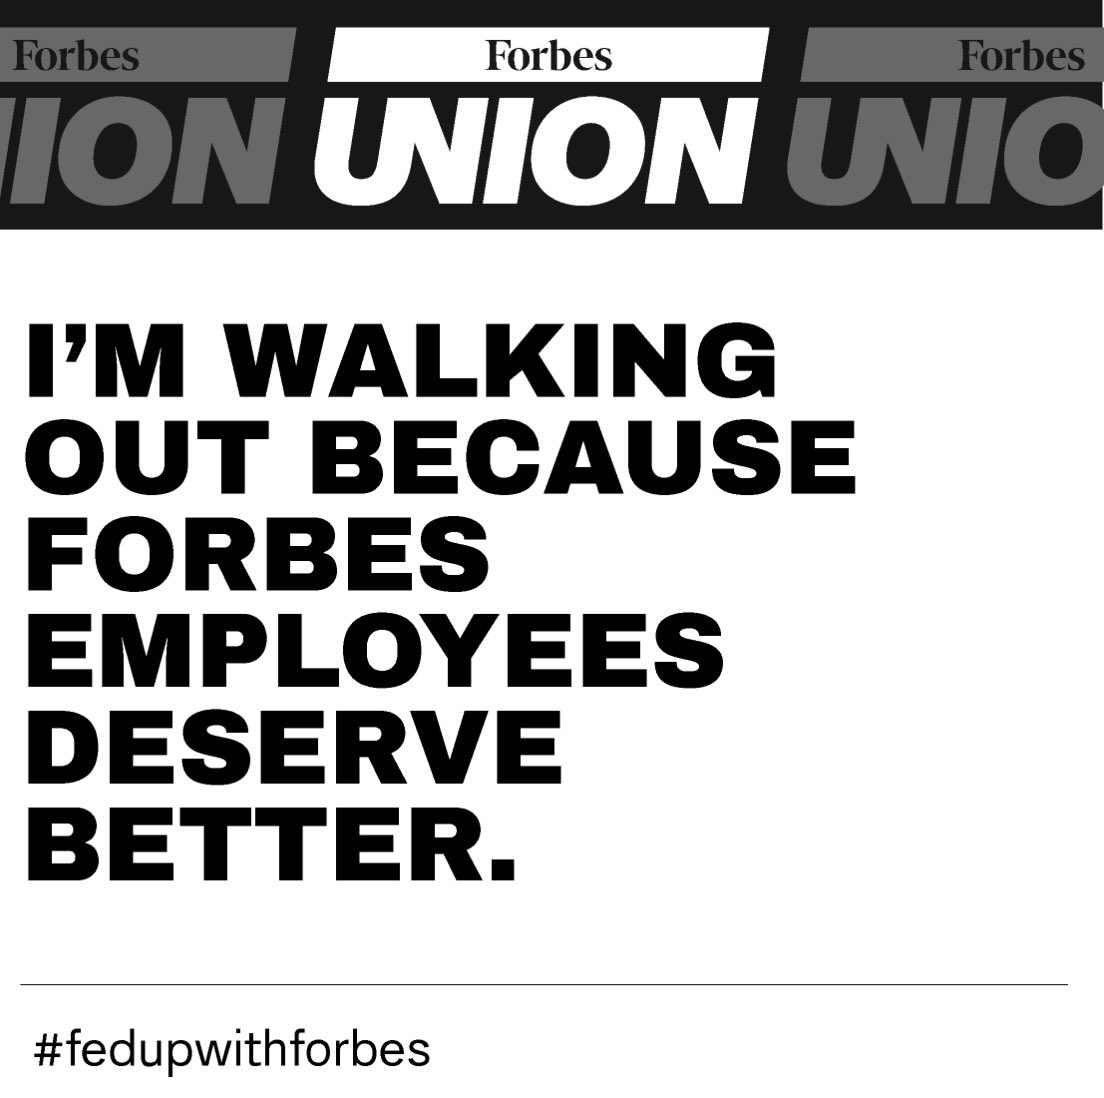 I’m walking out with my @forbesunion colleagues today. We’ve been at the bargaining table for years waiting for management to bargain in good faith. They have consistently stonewalled negotiations and interfered with union activity. 

#fedupwithforbes